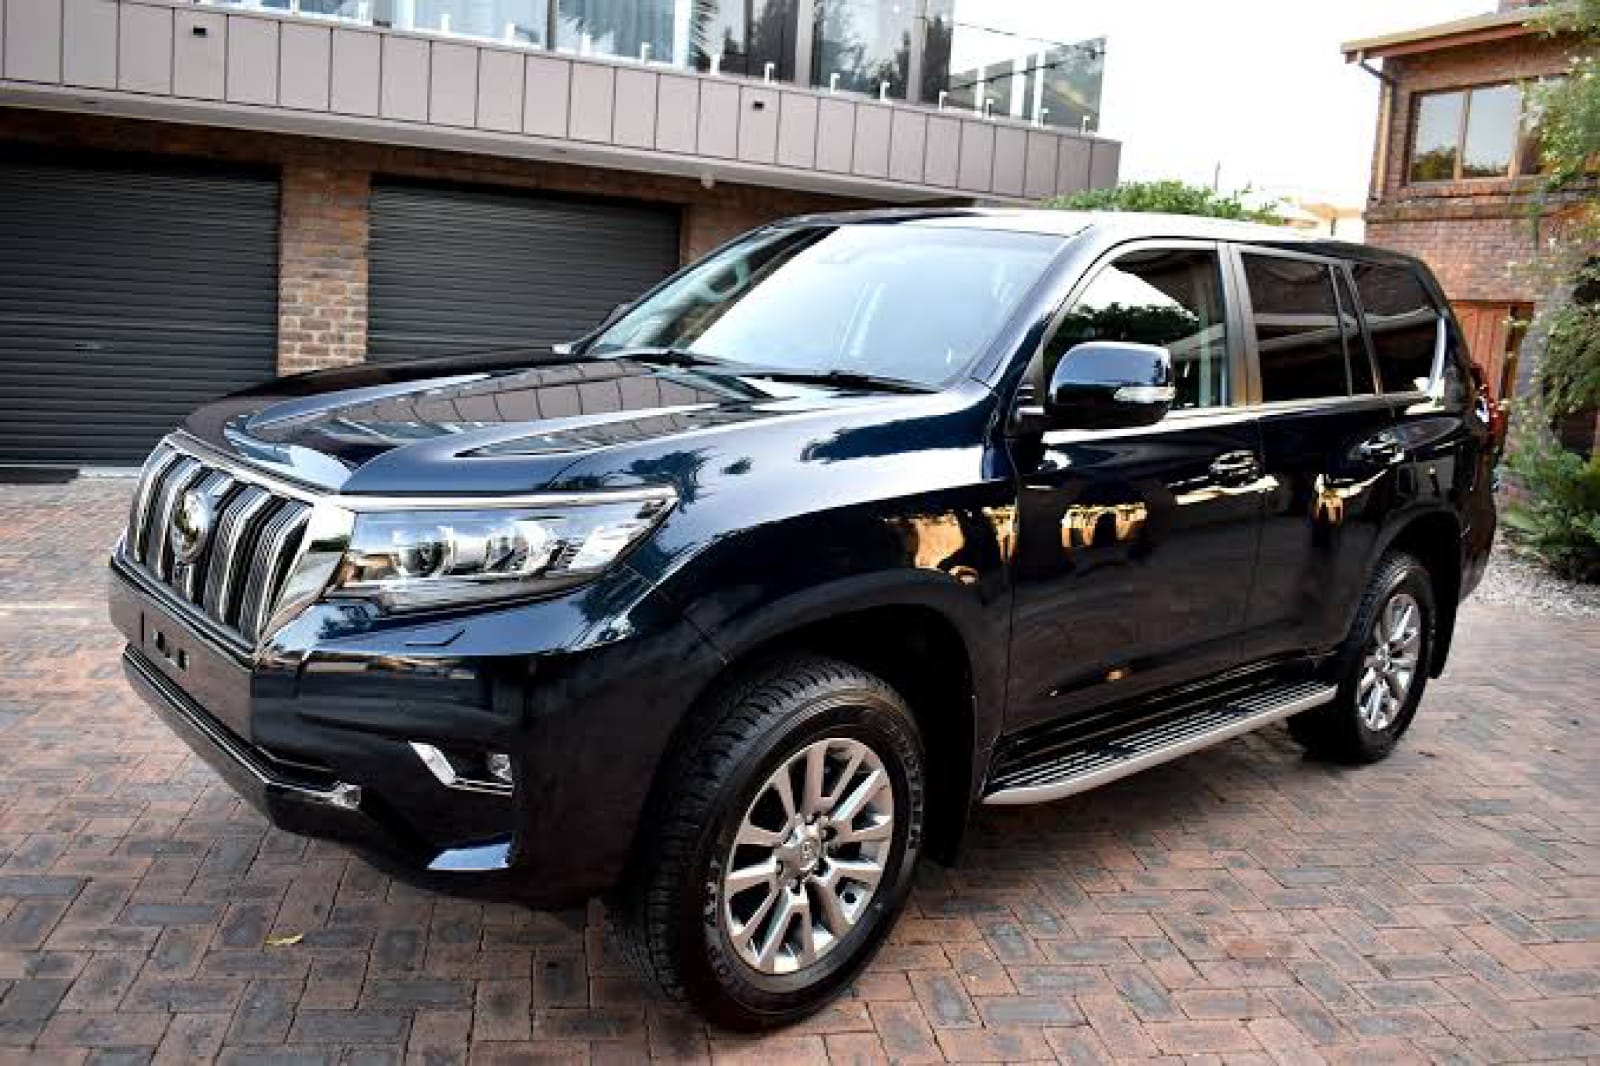 Toyota Prado For Hire Lease Rental in Kenya Best prices all cars available